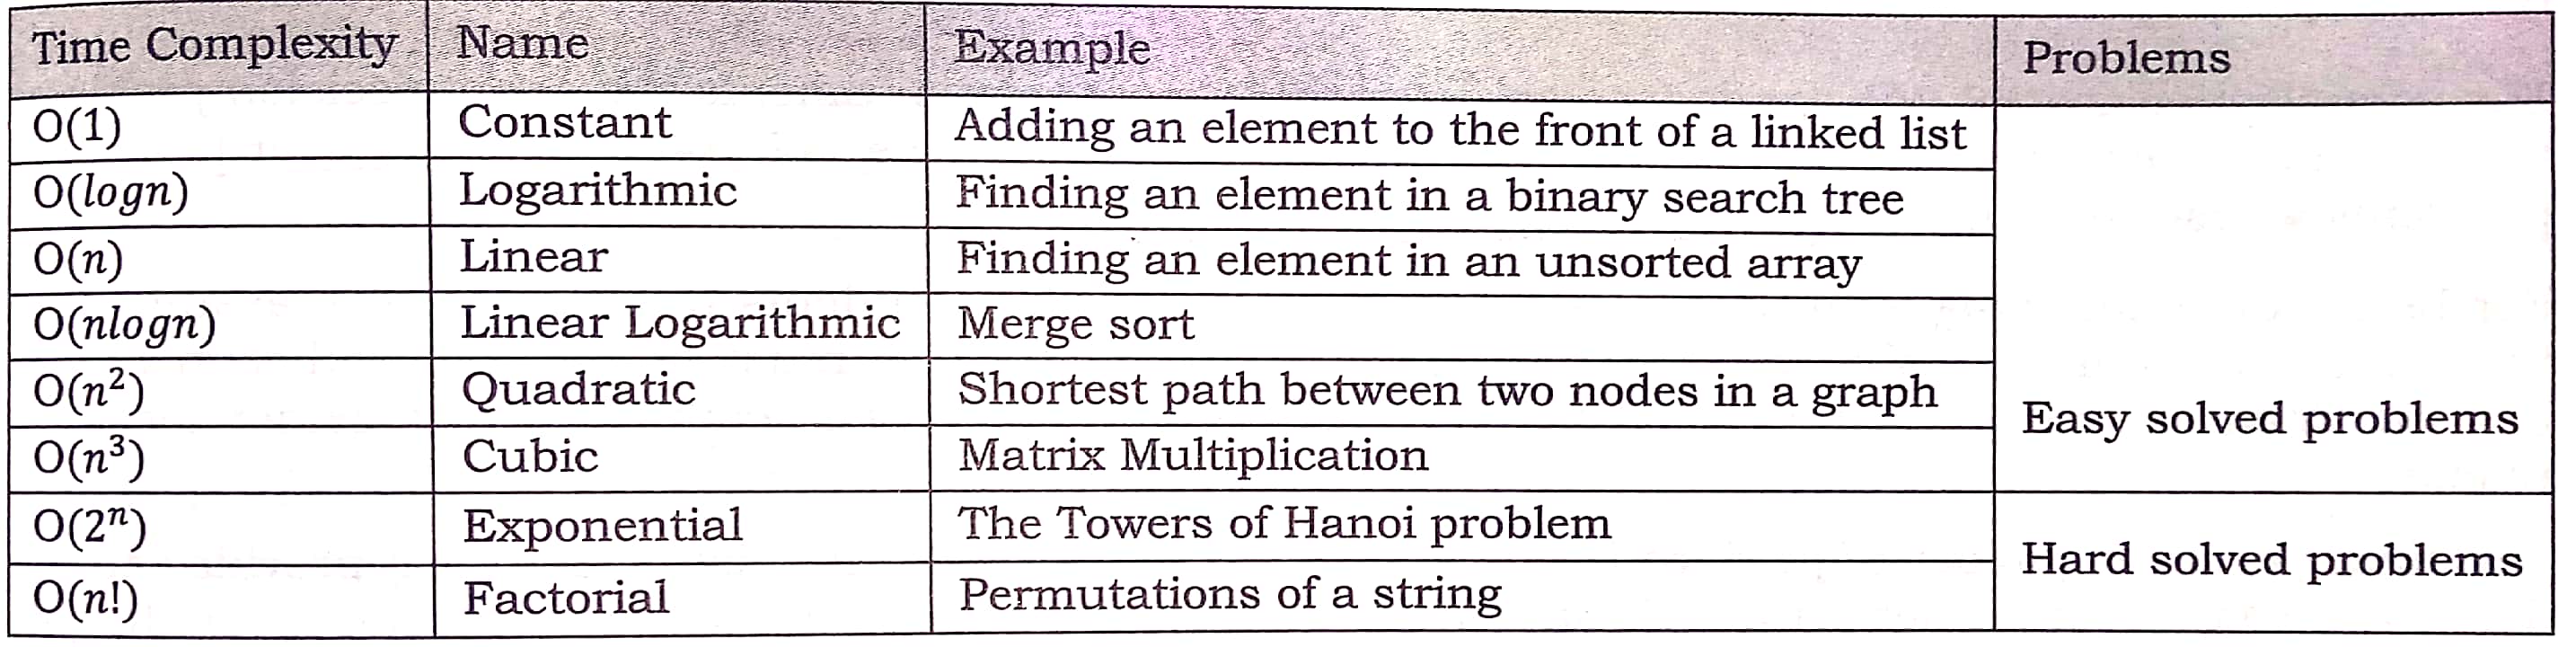 problem_complexity_classification